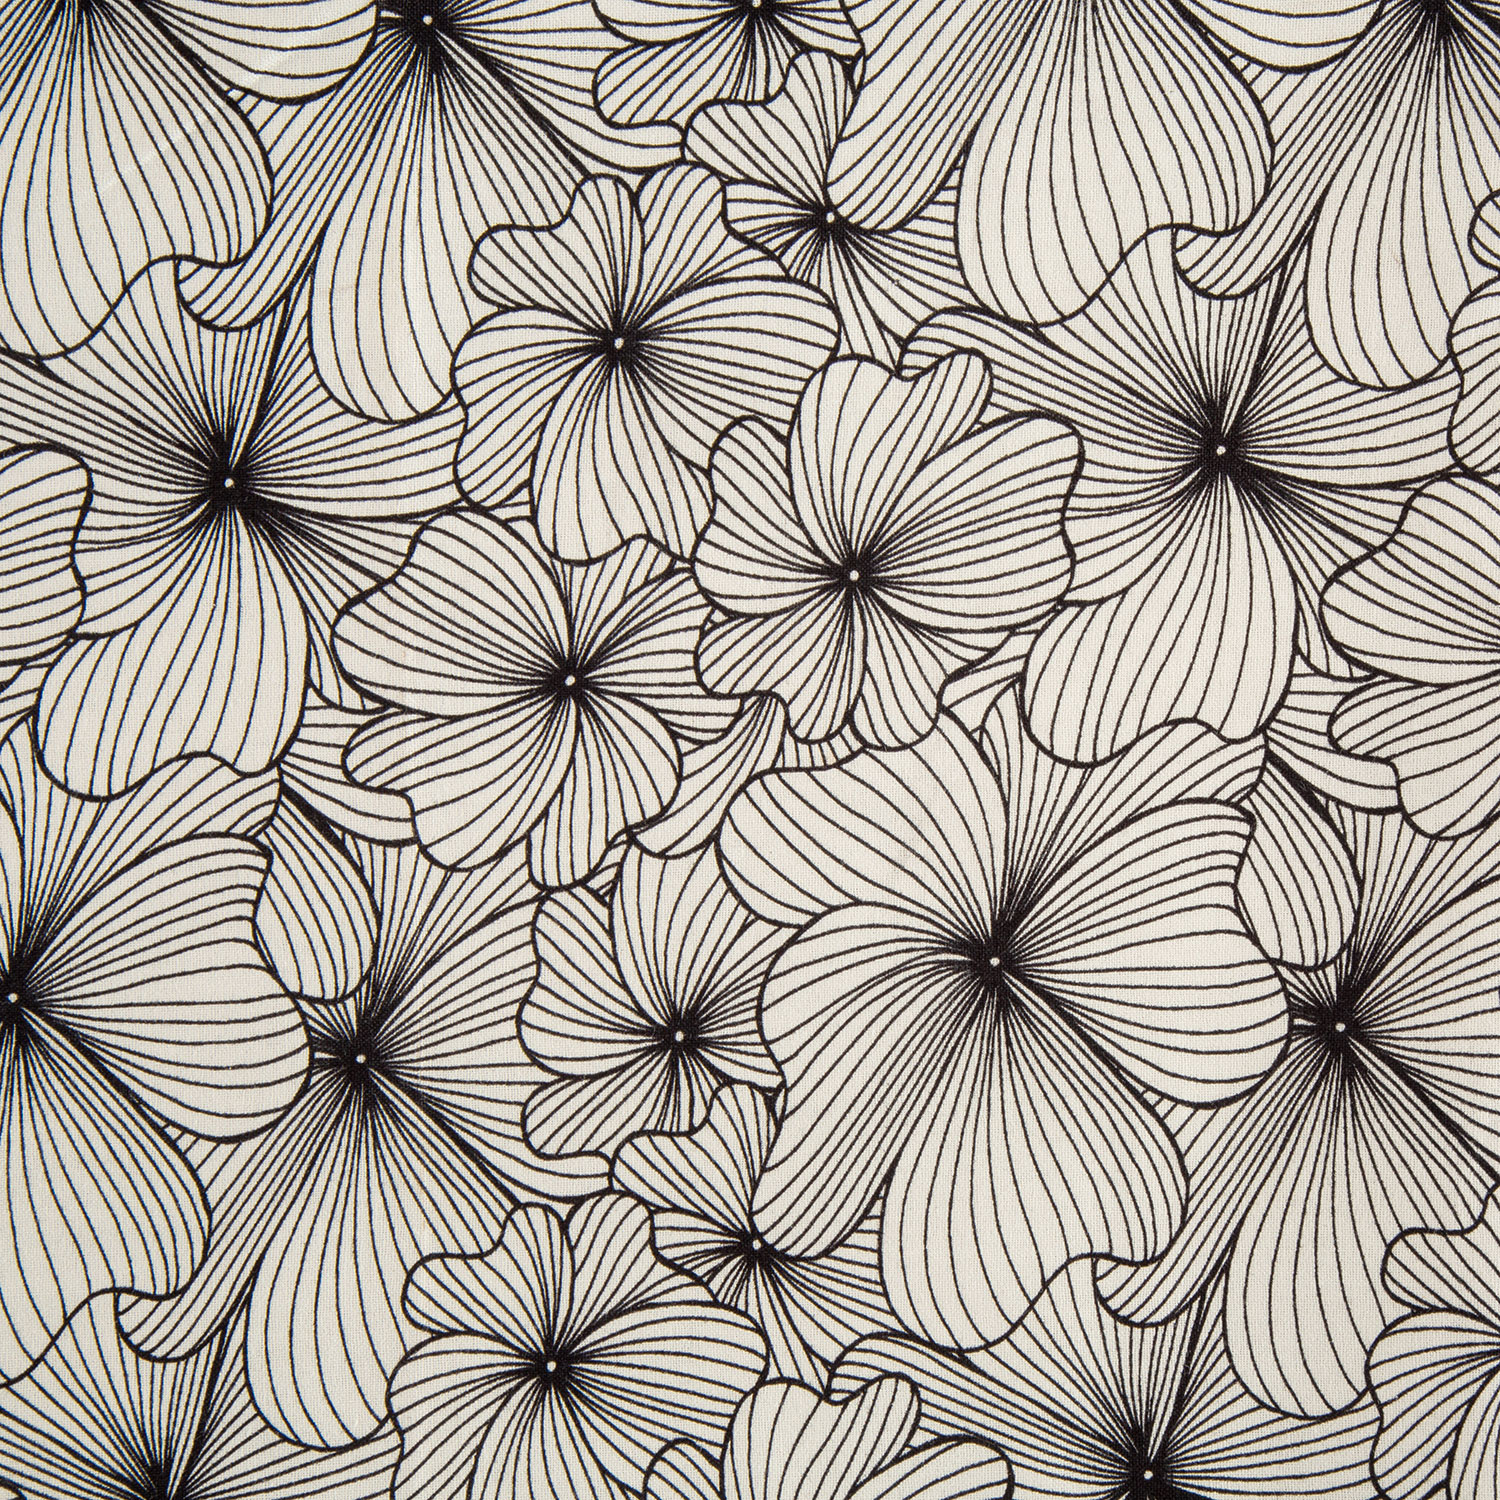 Fabric Freedom Monochrome Madness 1m Quilting Cotton Pick N Mix - Pick any 2 - Variagated Flowers